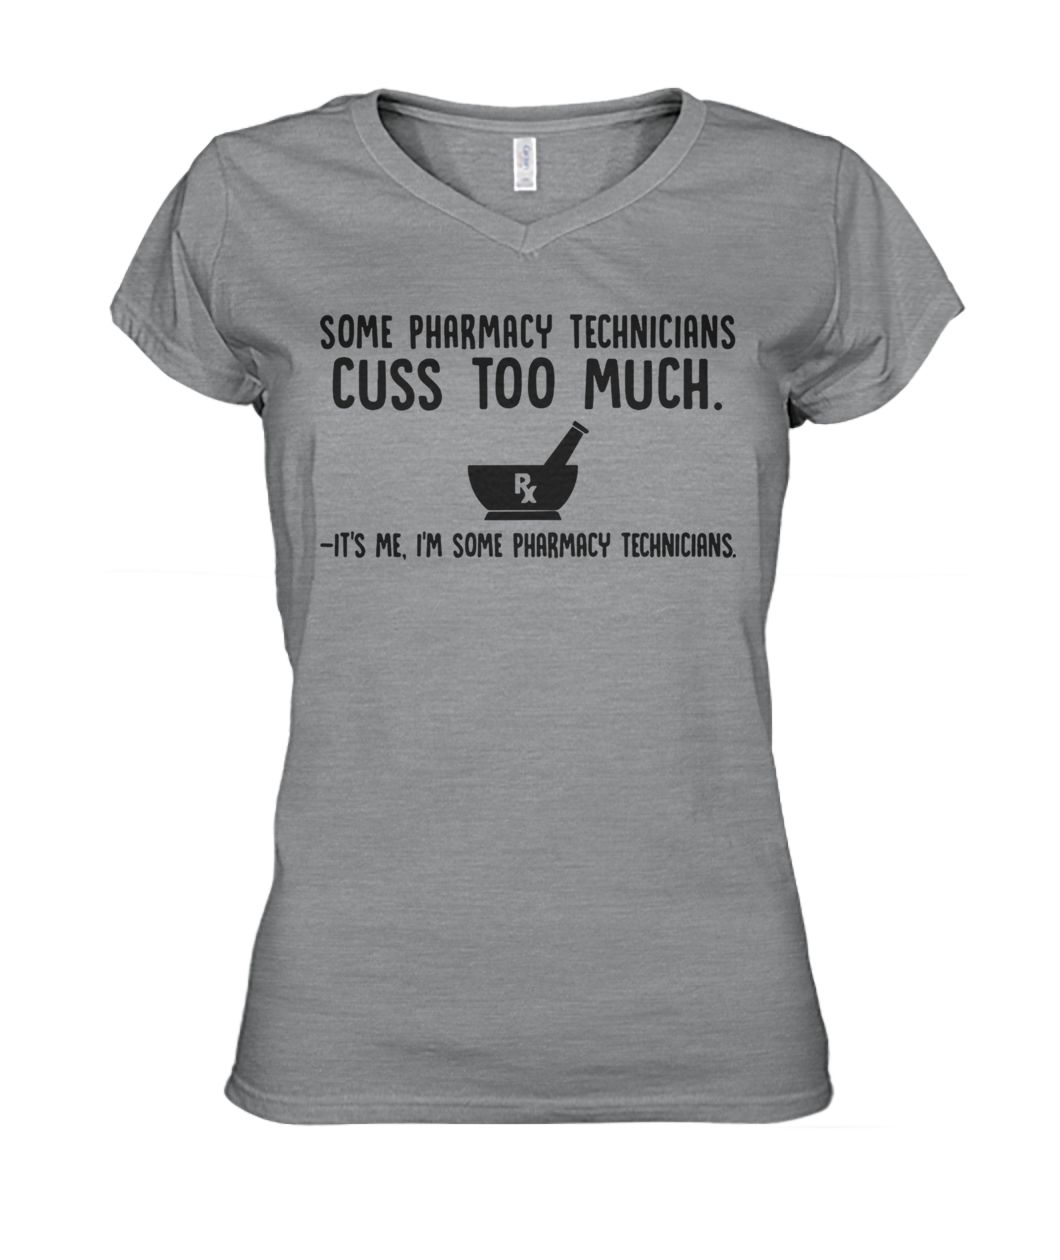 Some pharmacy technicians cuss too much it's me I'm some pharmacy technicians women's v-neck